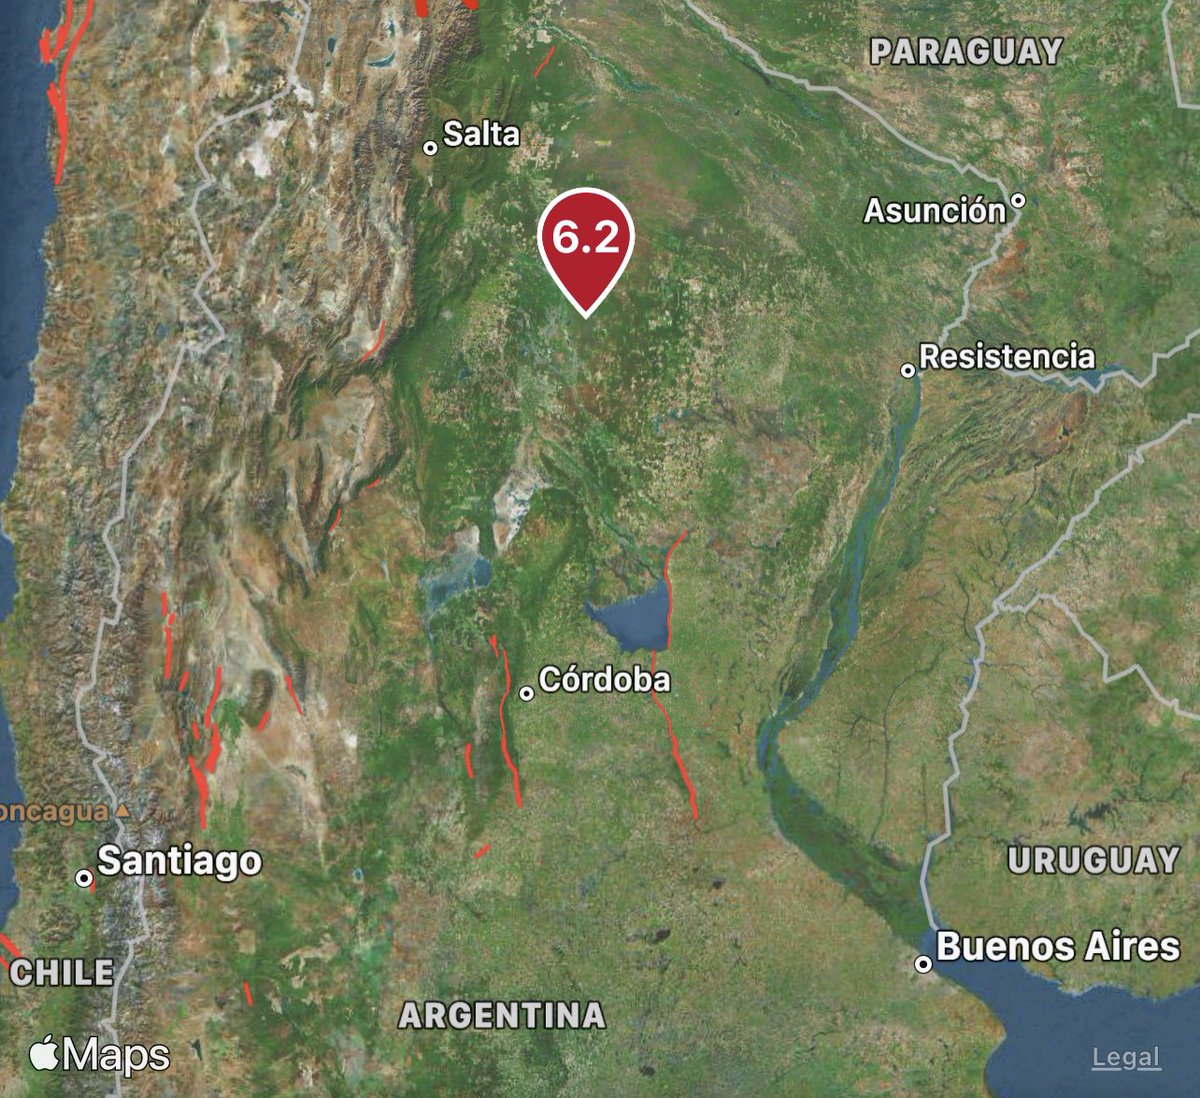 #BreakingNews 
A massive 6.2 magnitude earthquake has struck Argentina, centered in the City of El Hoyo.

This is Developing. 

📍#ElHoyo #Argentina